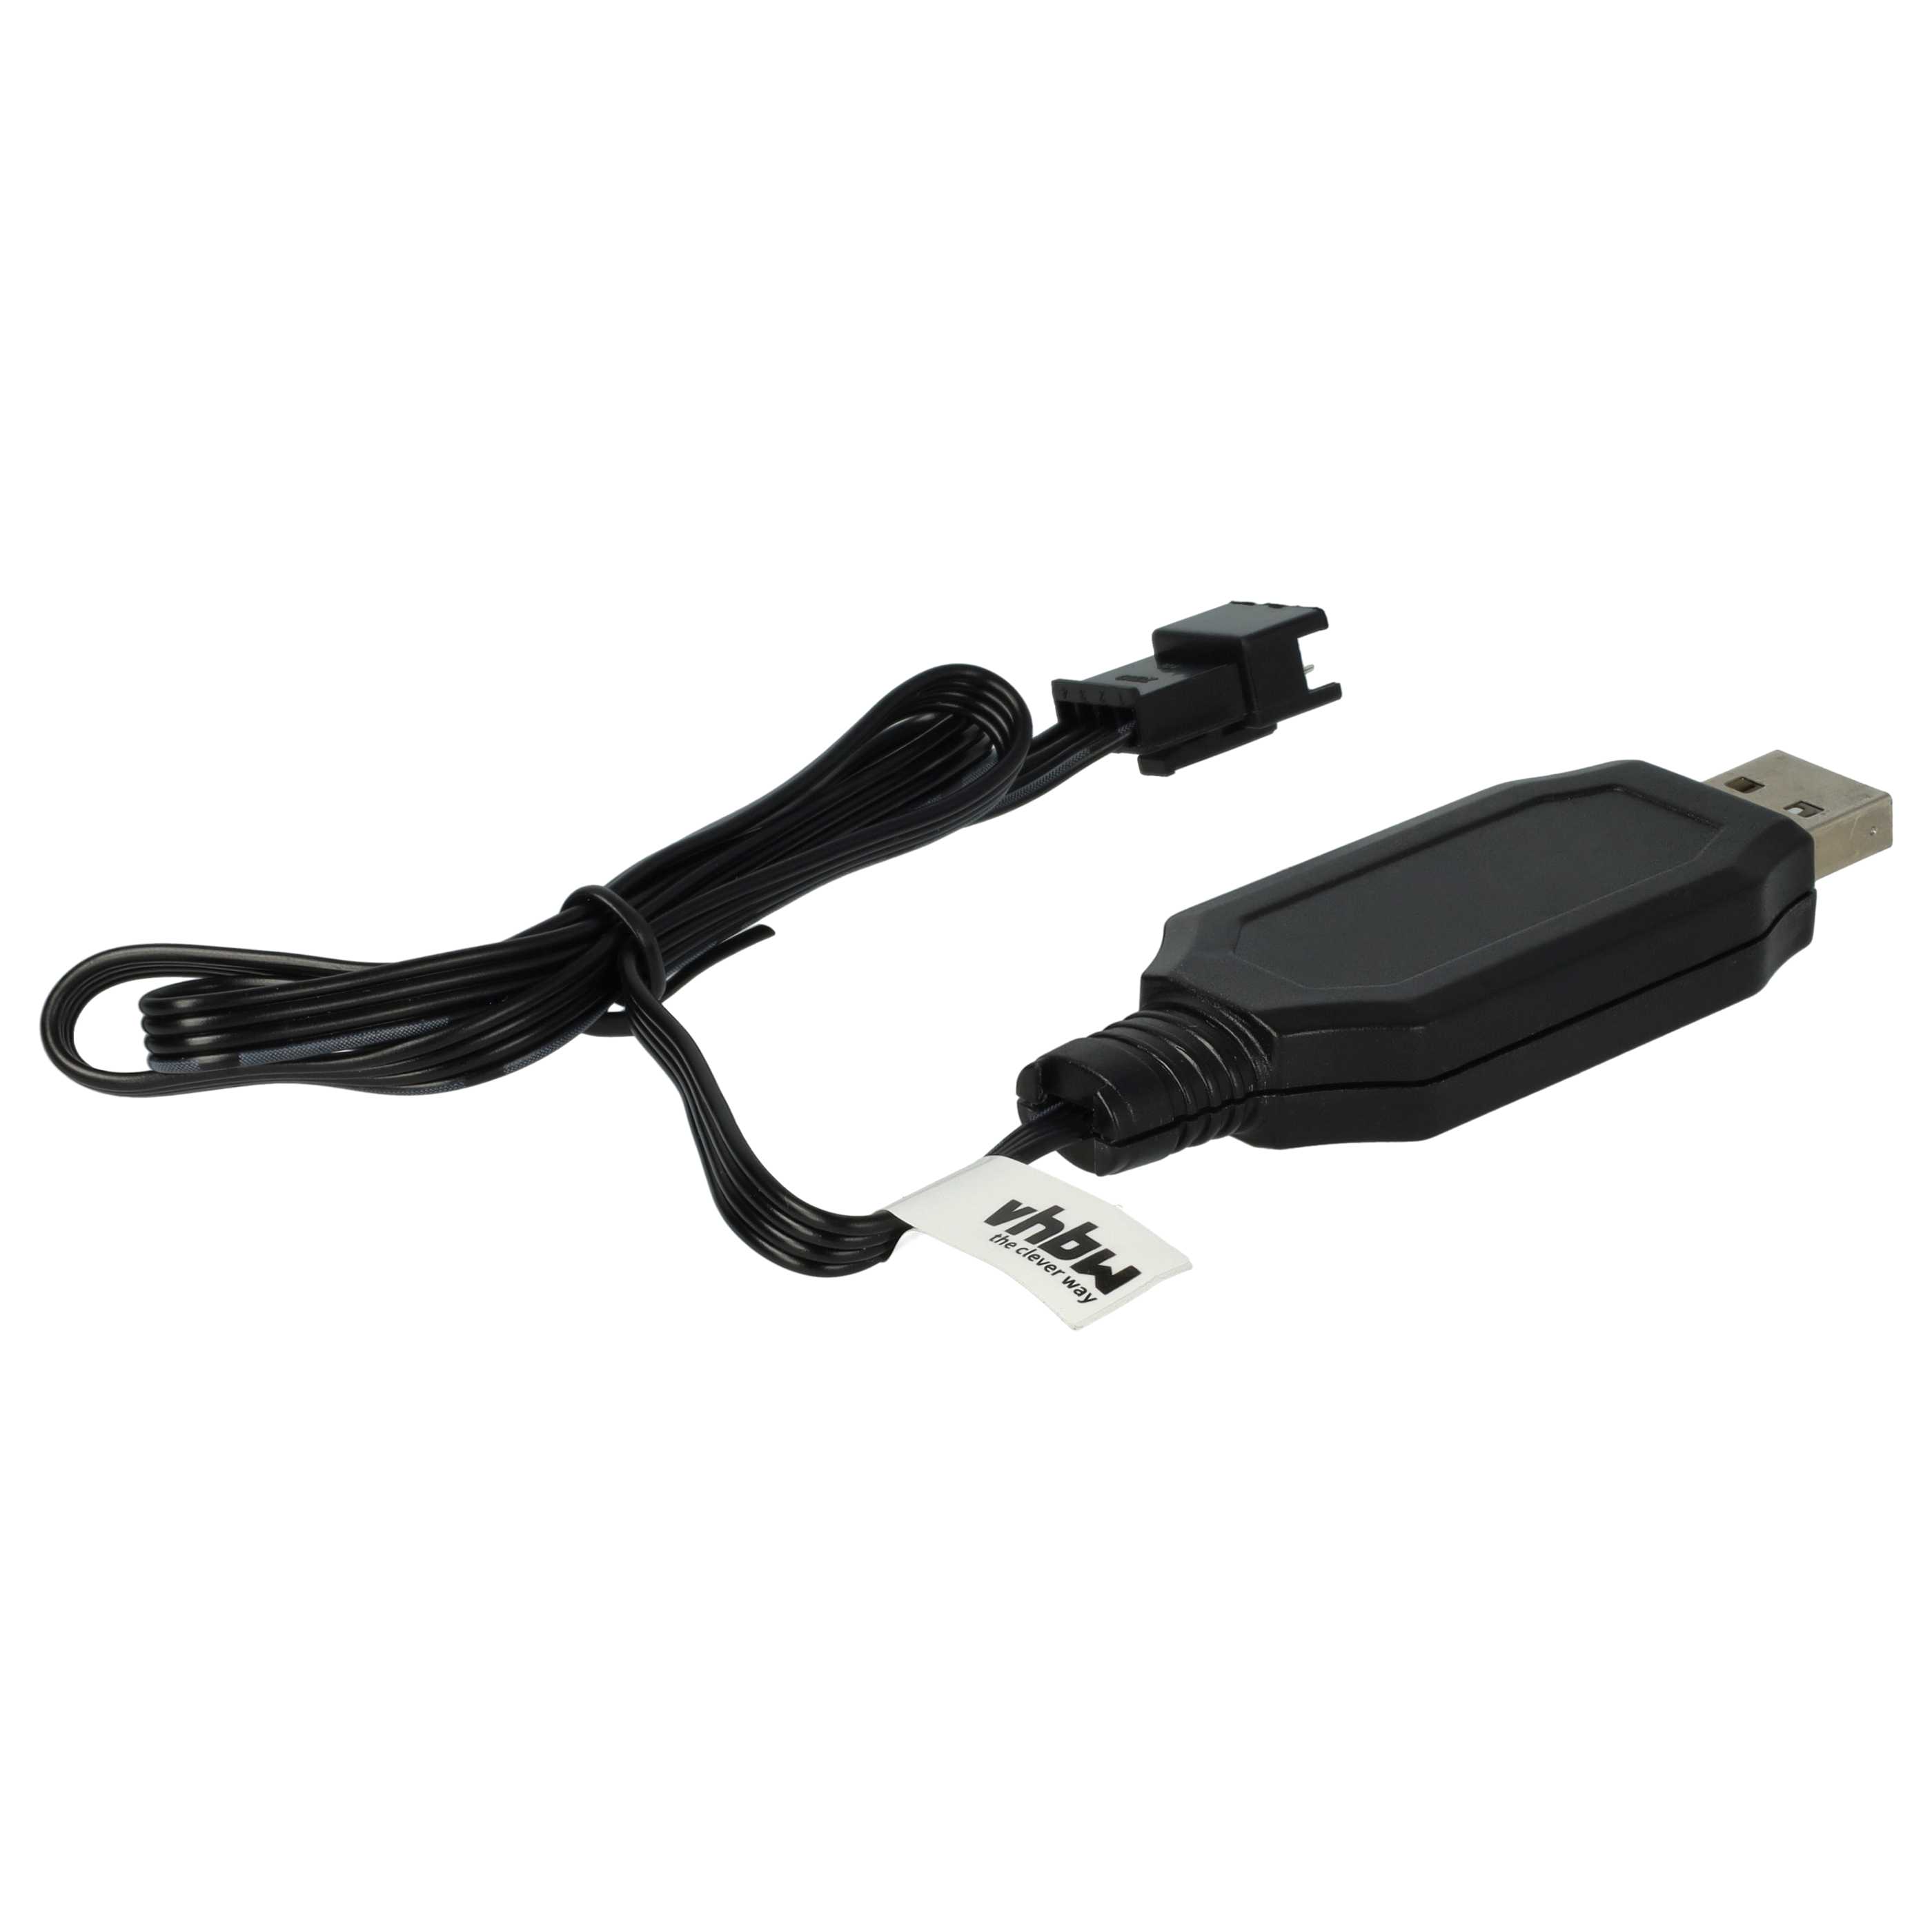 USB Charging Cable suitable for RC Batteries with SM-4P Connector, RC Model Making Battery Packs - 60 cm 7.5 V